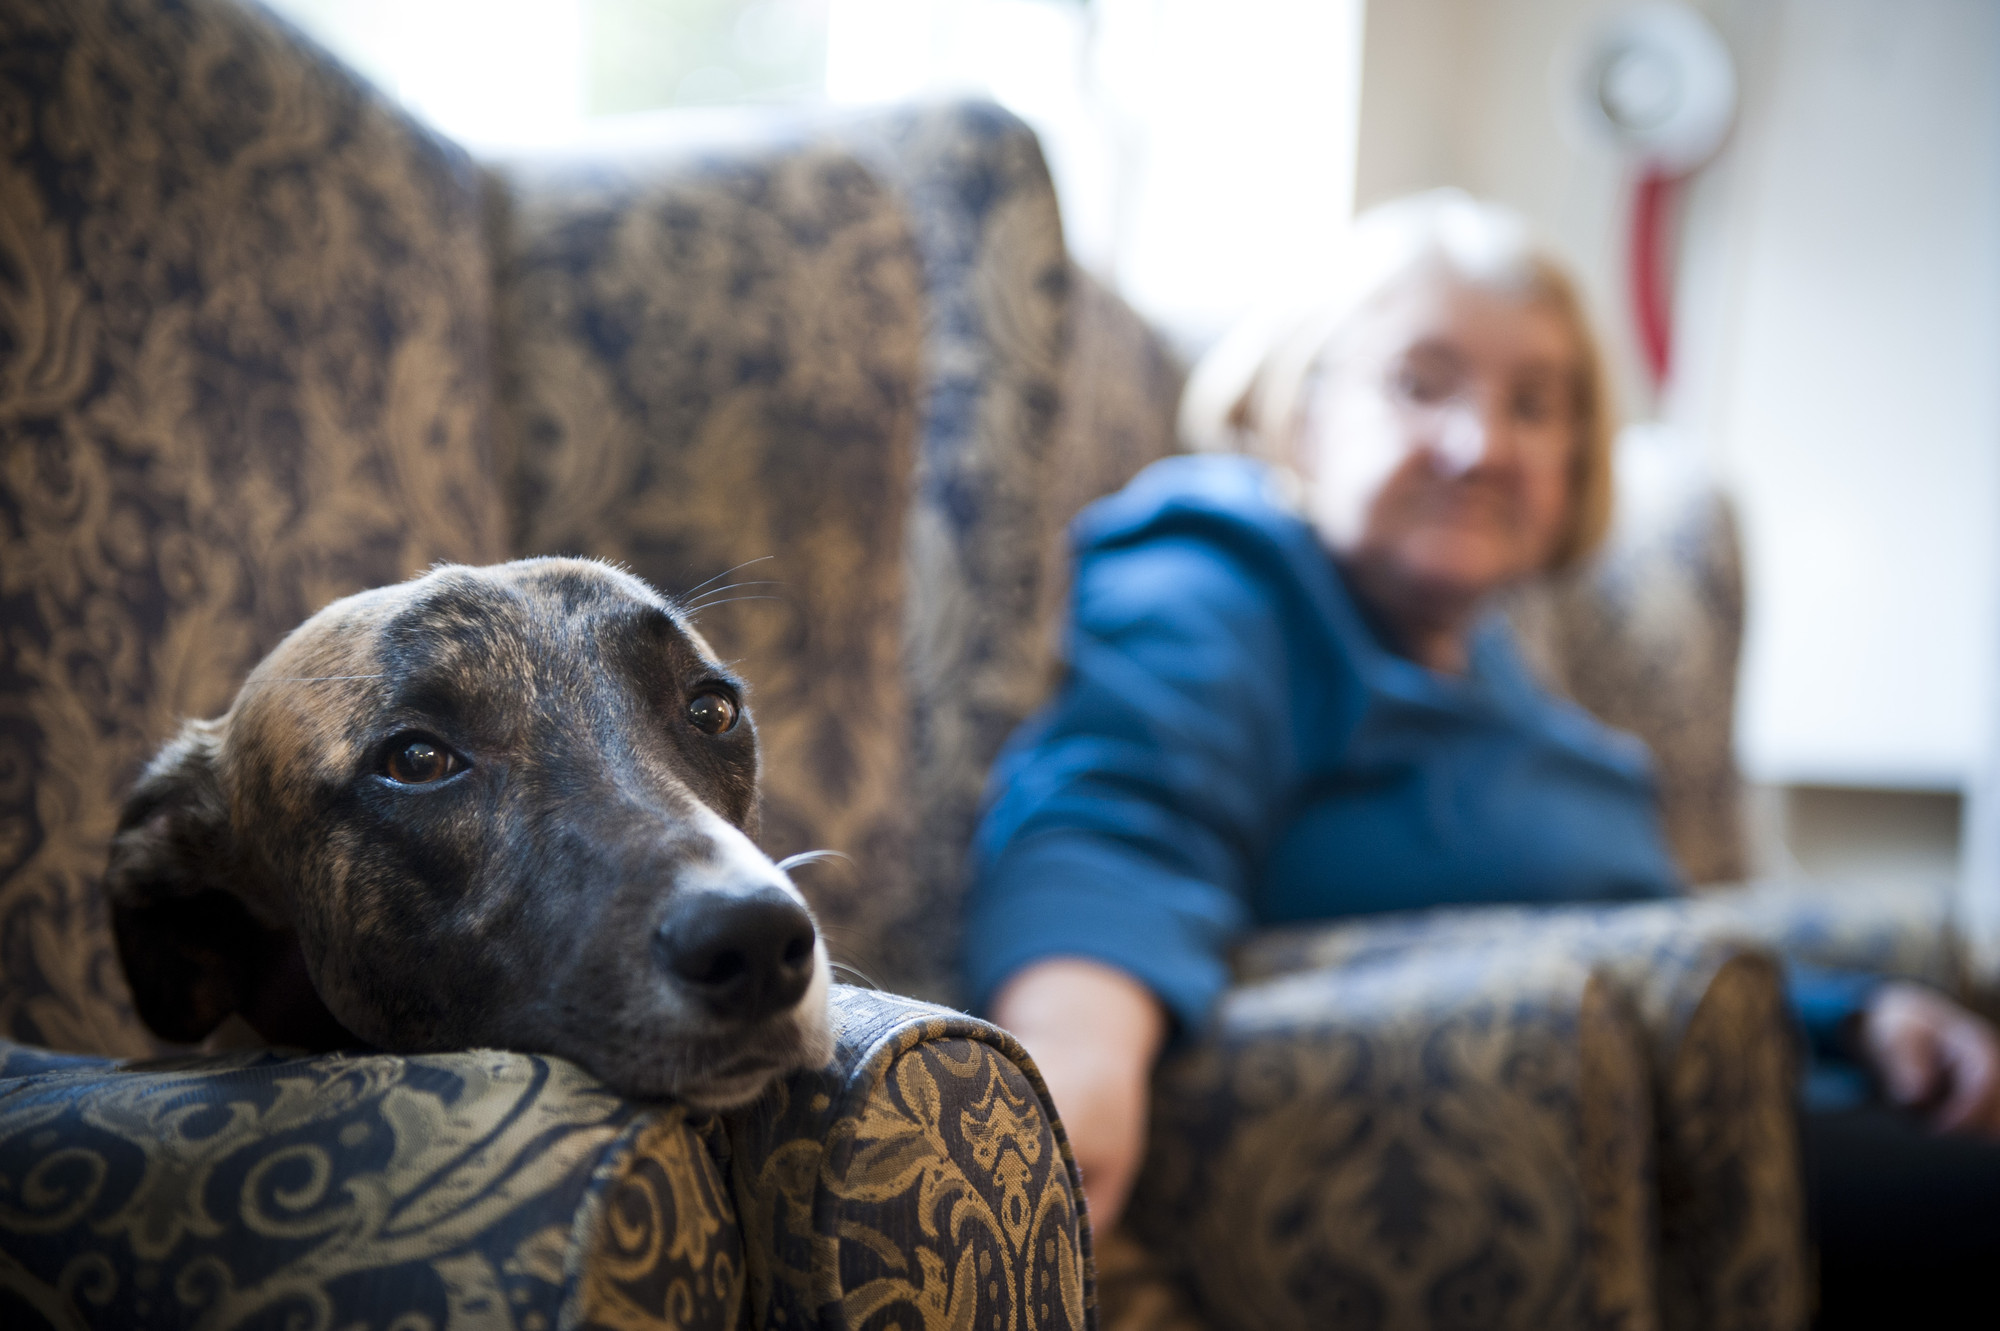 can cancer patients have dogs